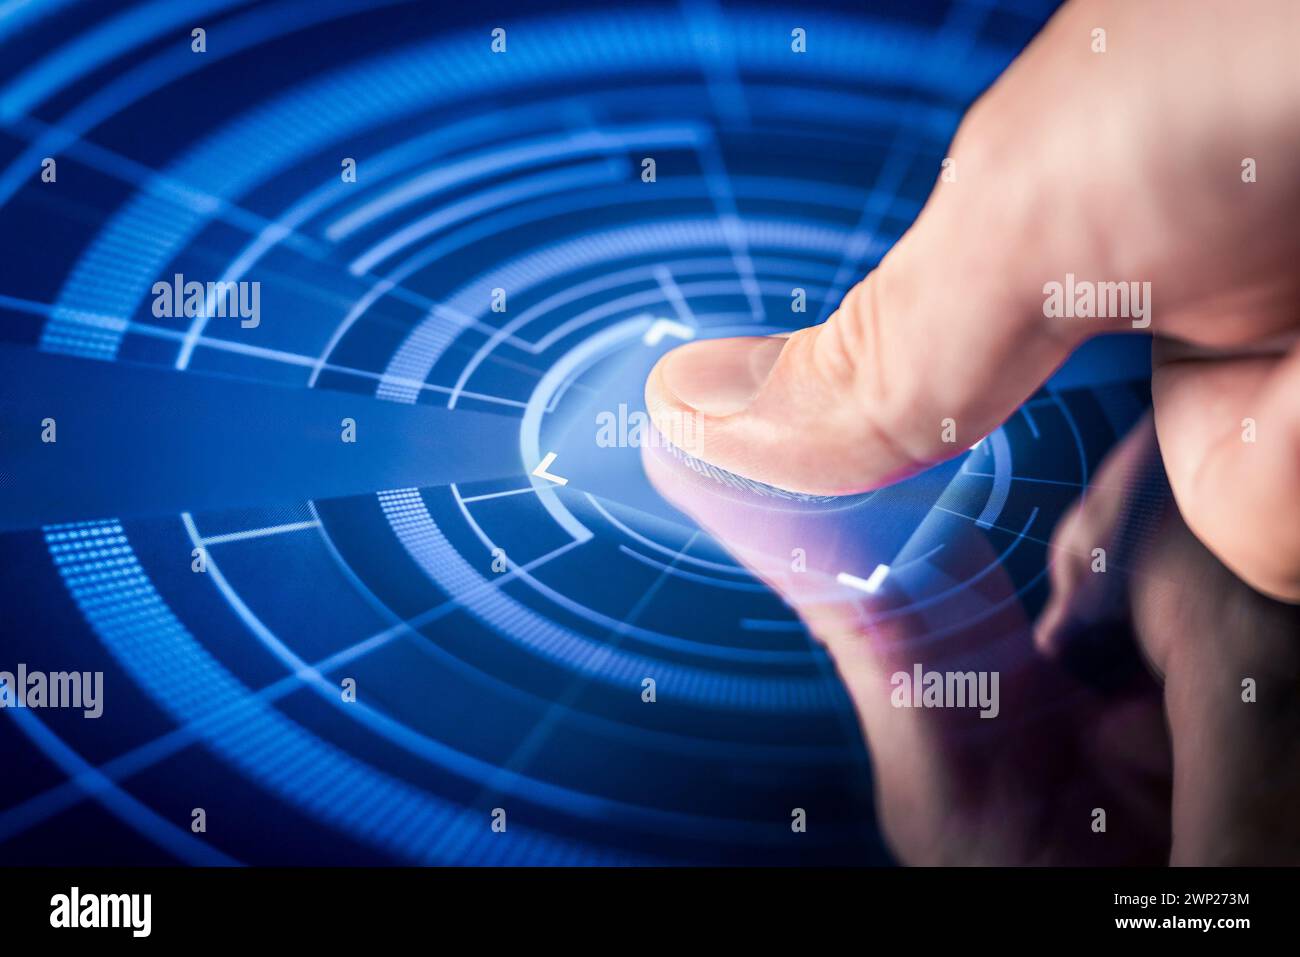 Fingerprint biometric scan. Finger print and thumb recognition for digital protection and data access. Identity verification with thumbprint reader. Stock Photo